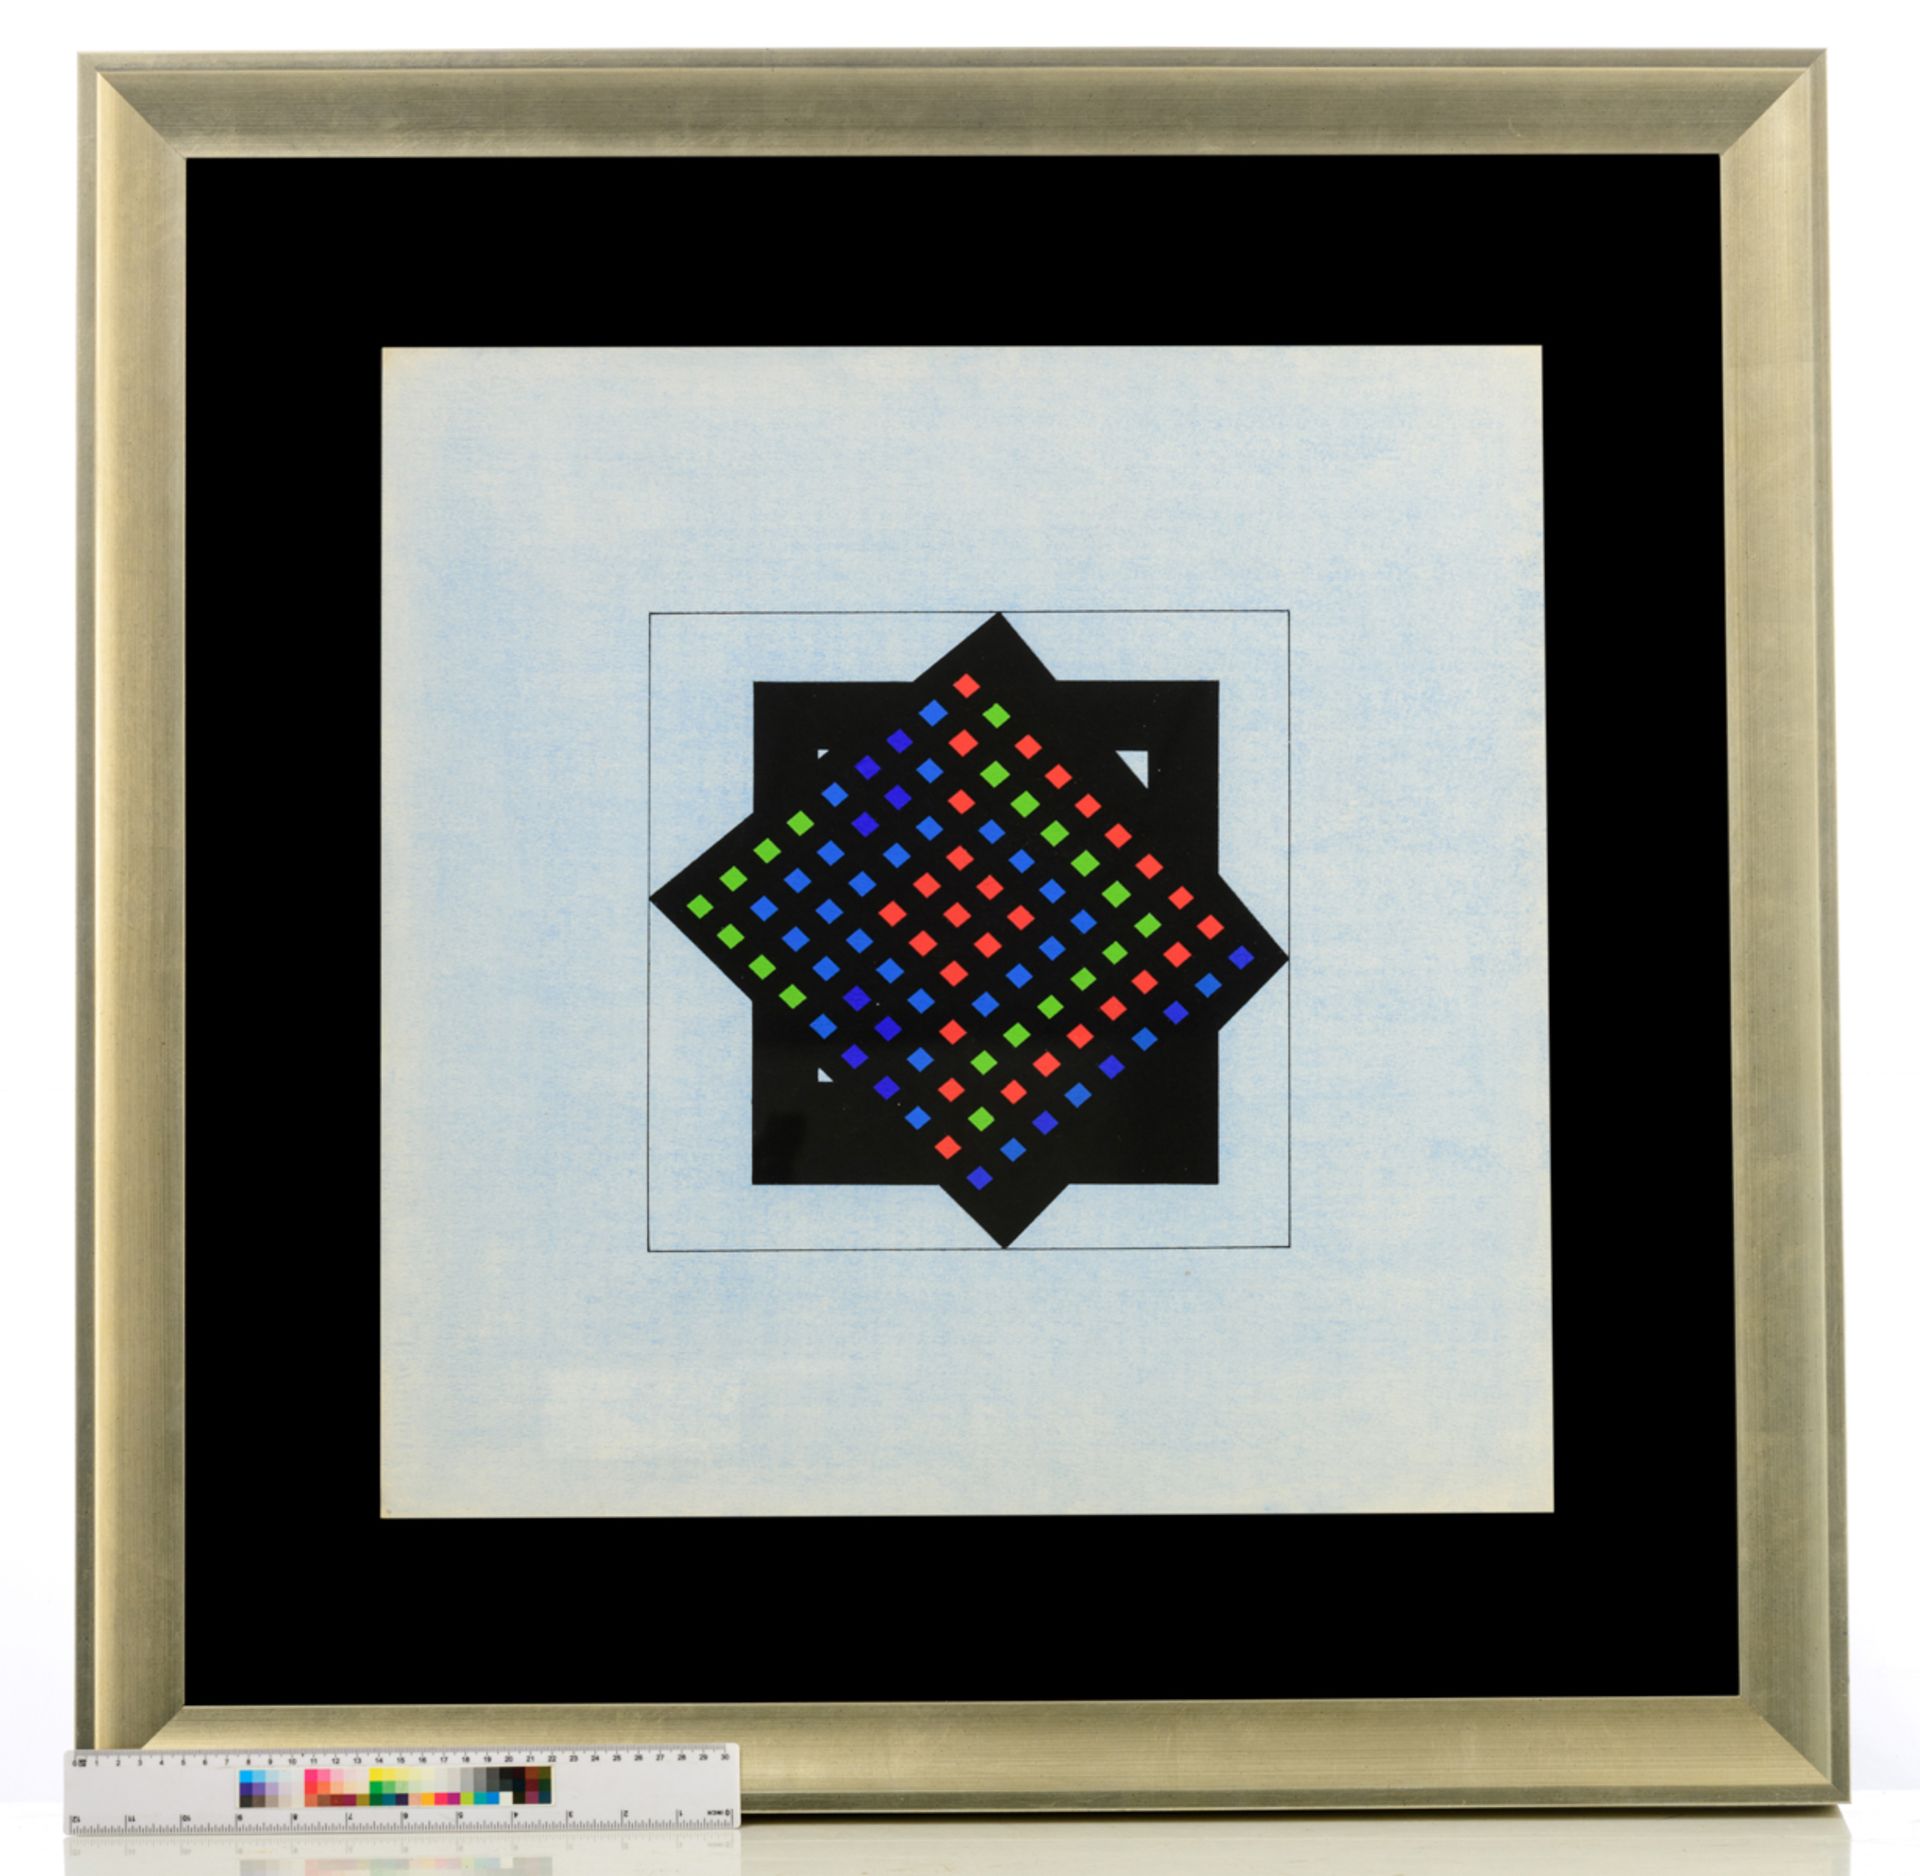 Vandenbranden G., a geometric abstraction, dated (19)69, acrylic and colour pencil on Steinbach pape - Bild 5 aus 5